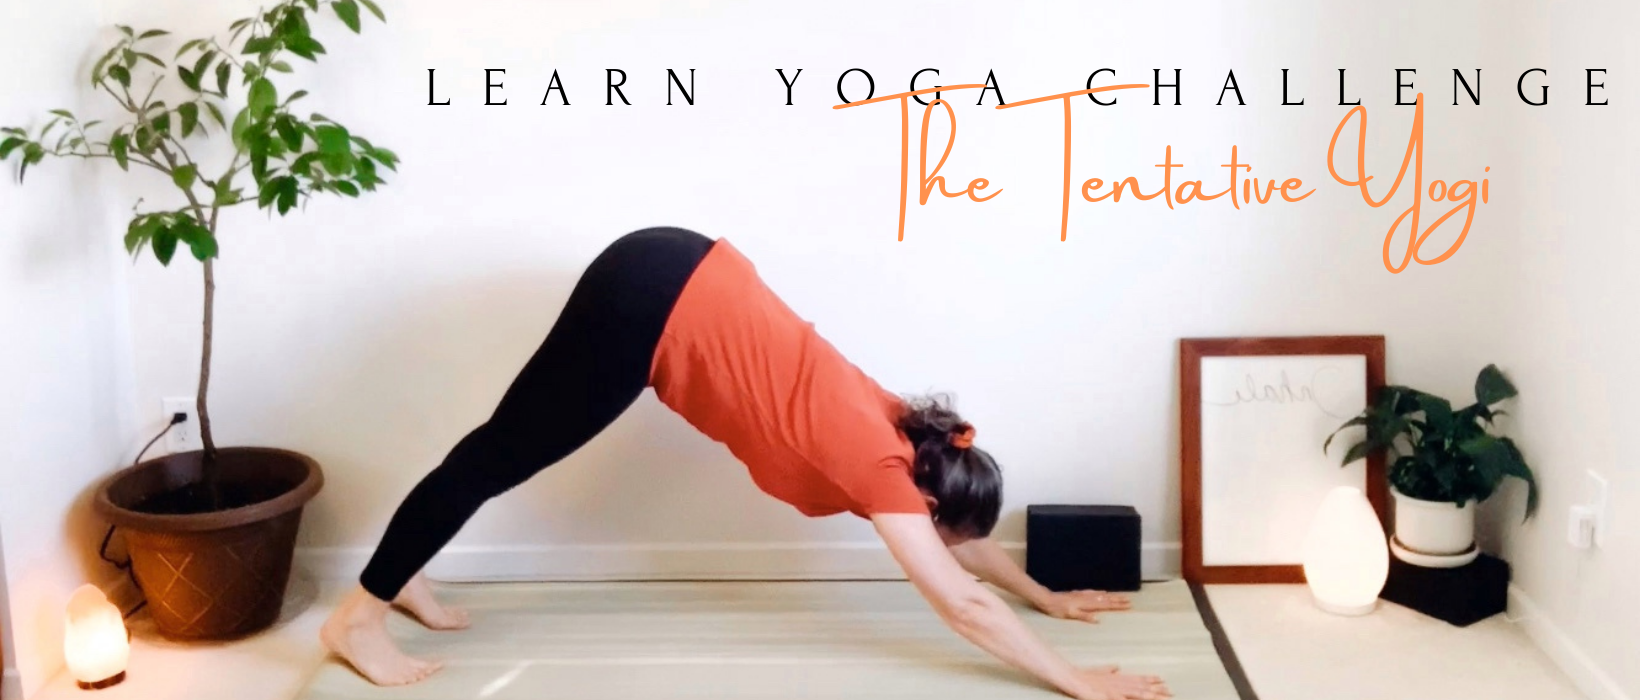 Let's Learn Yoga!